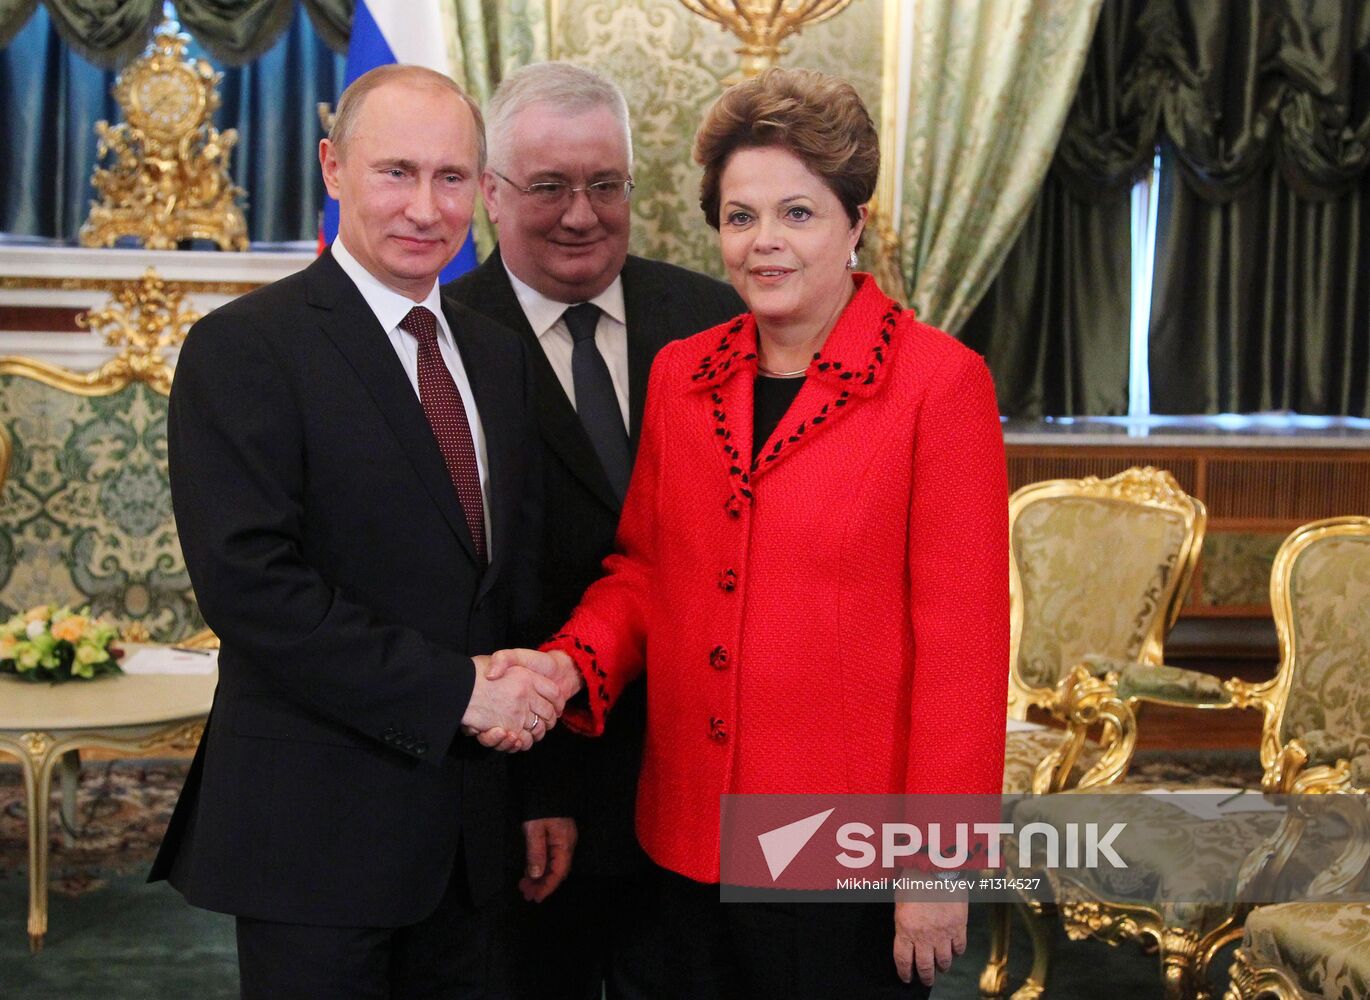 V.Putin meets with D.Rousseff in Moscow